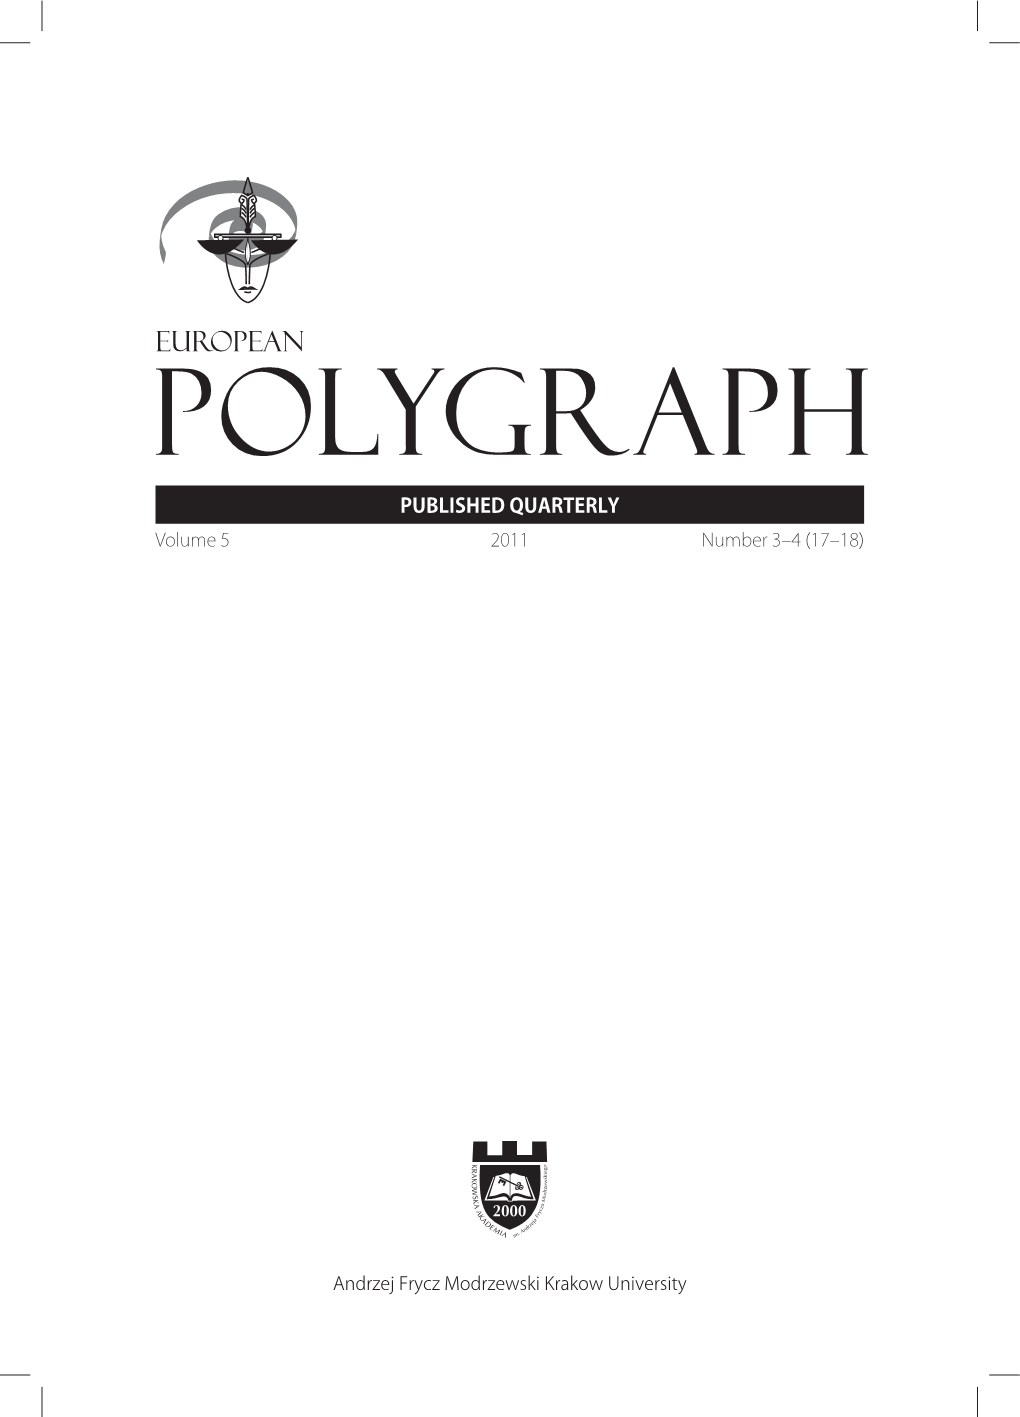 Legal Admissibility of Employee Polygraph Examinations in Poland